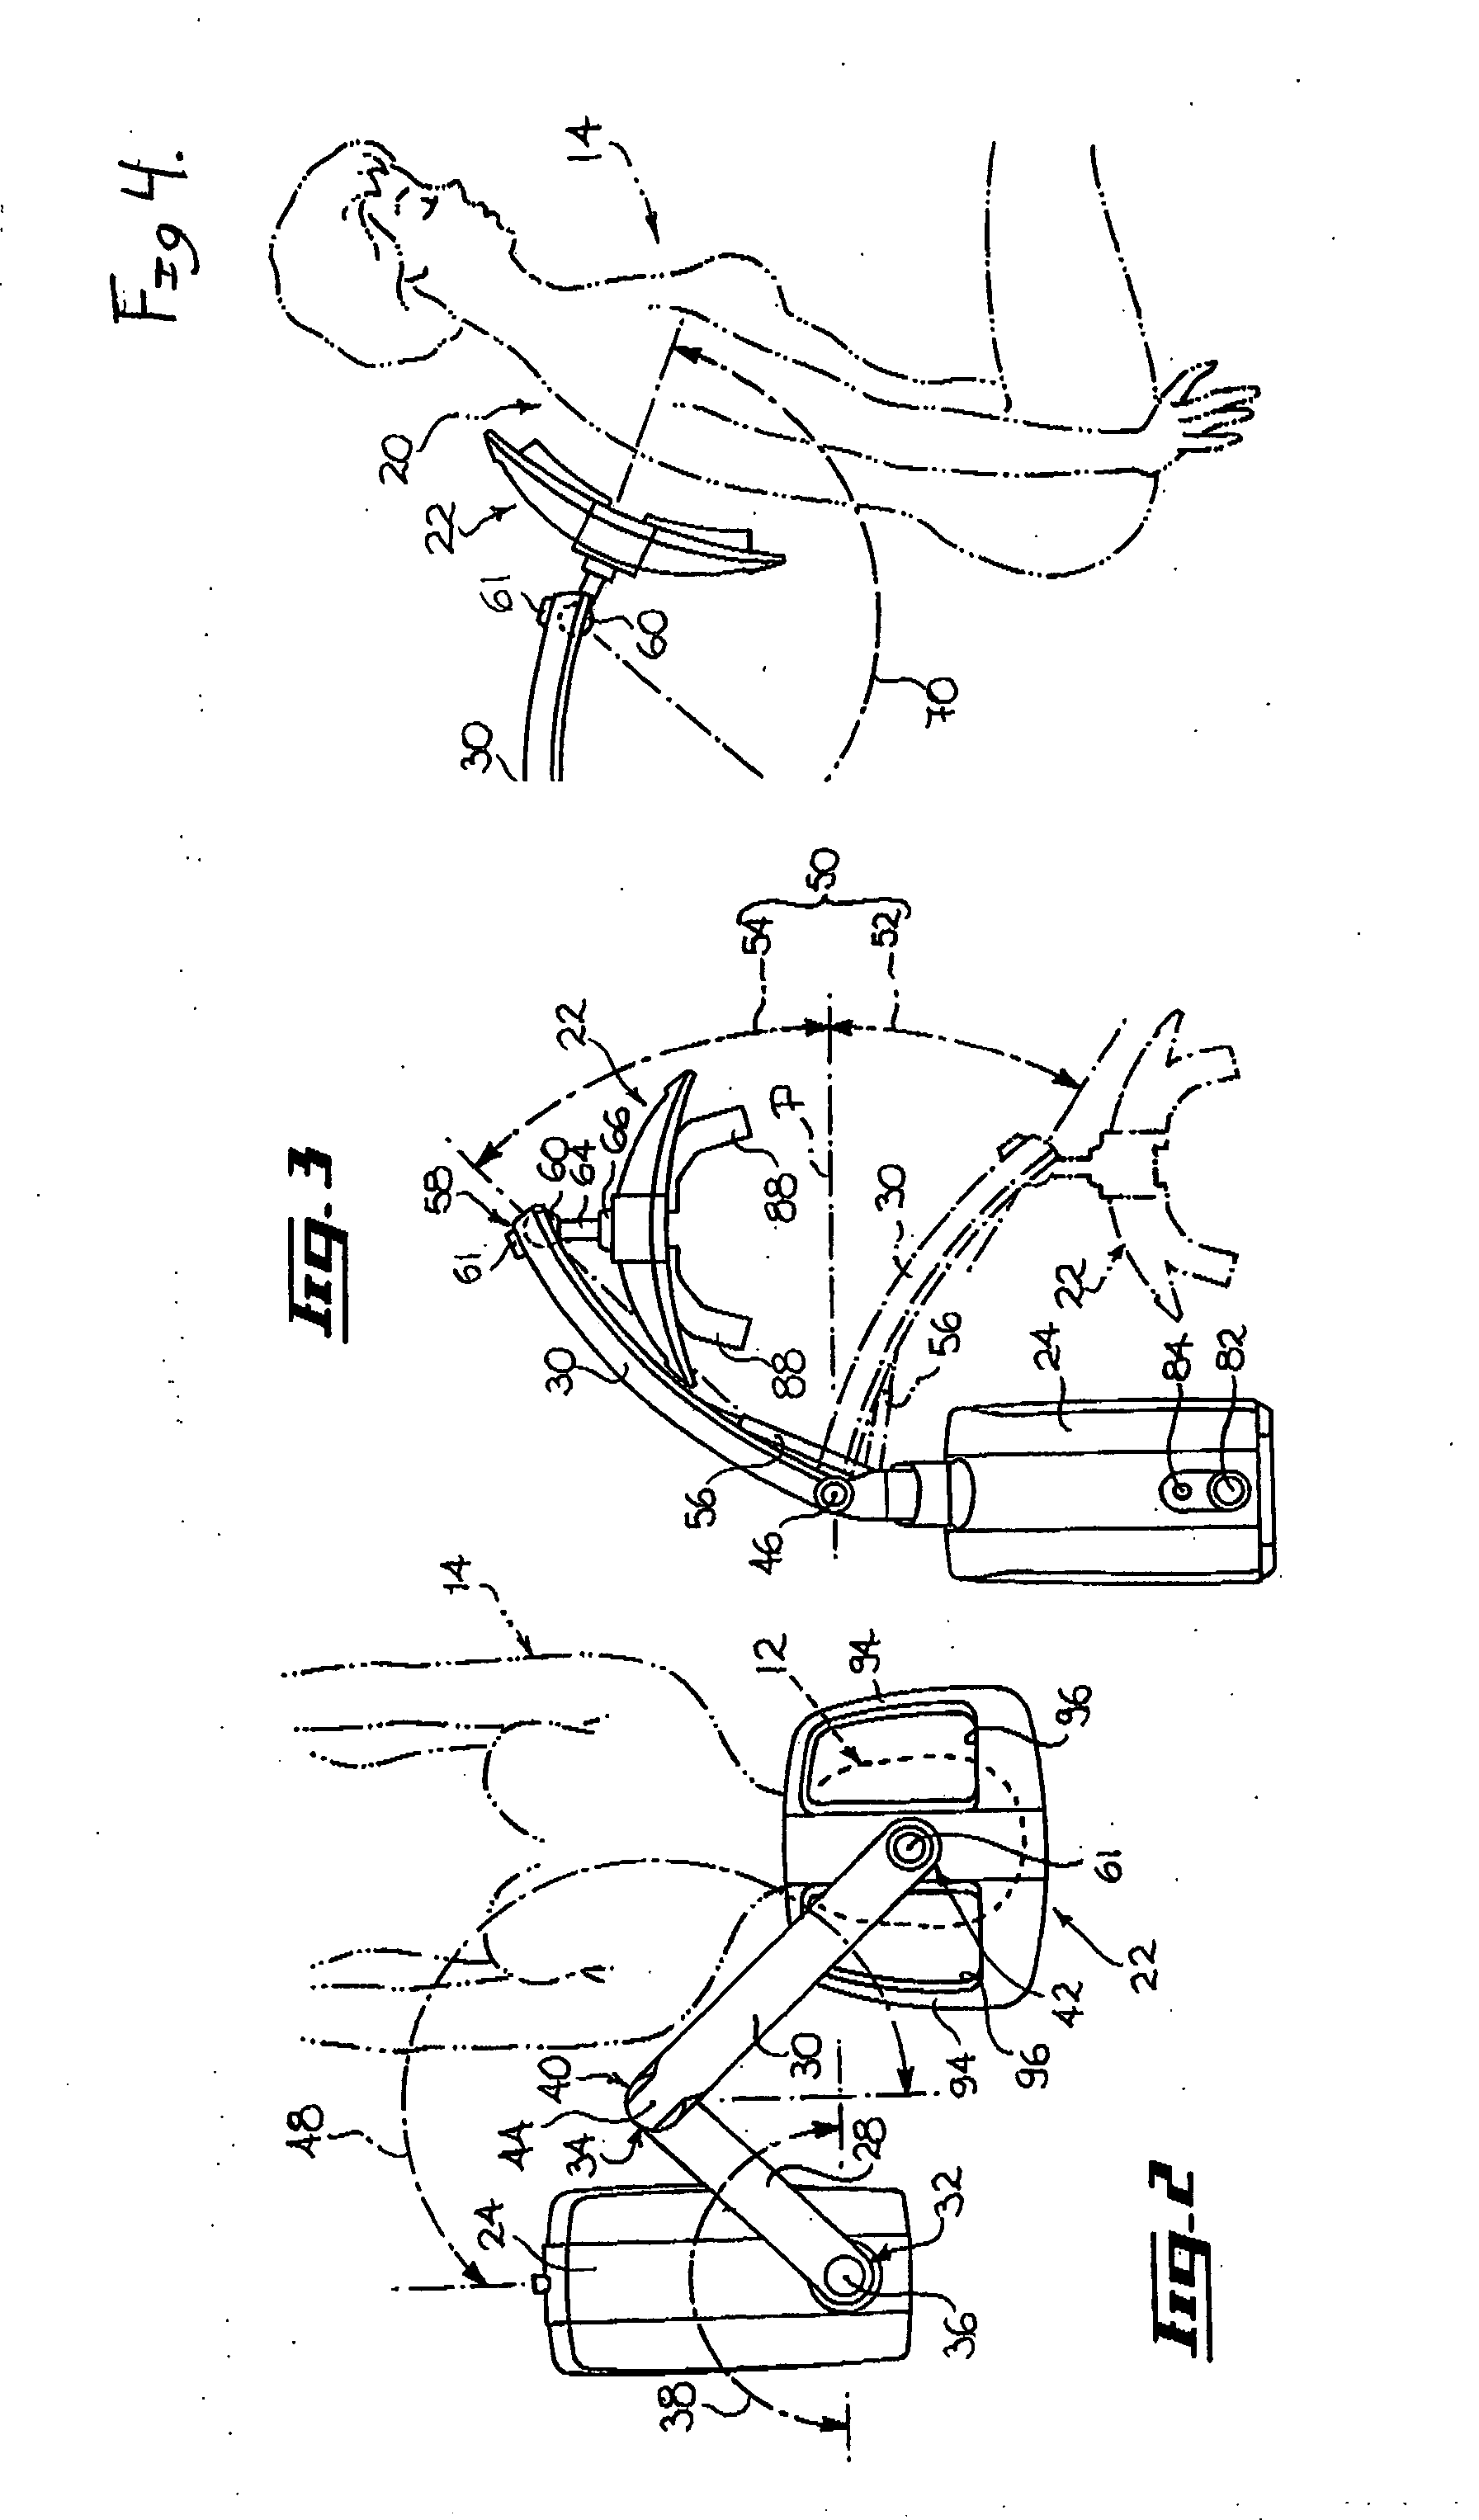 Method and device for the treatment of mammalian tissues